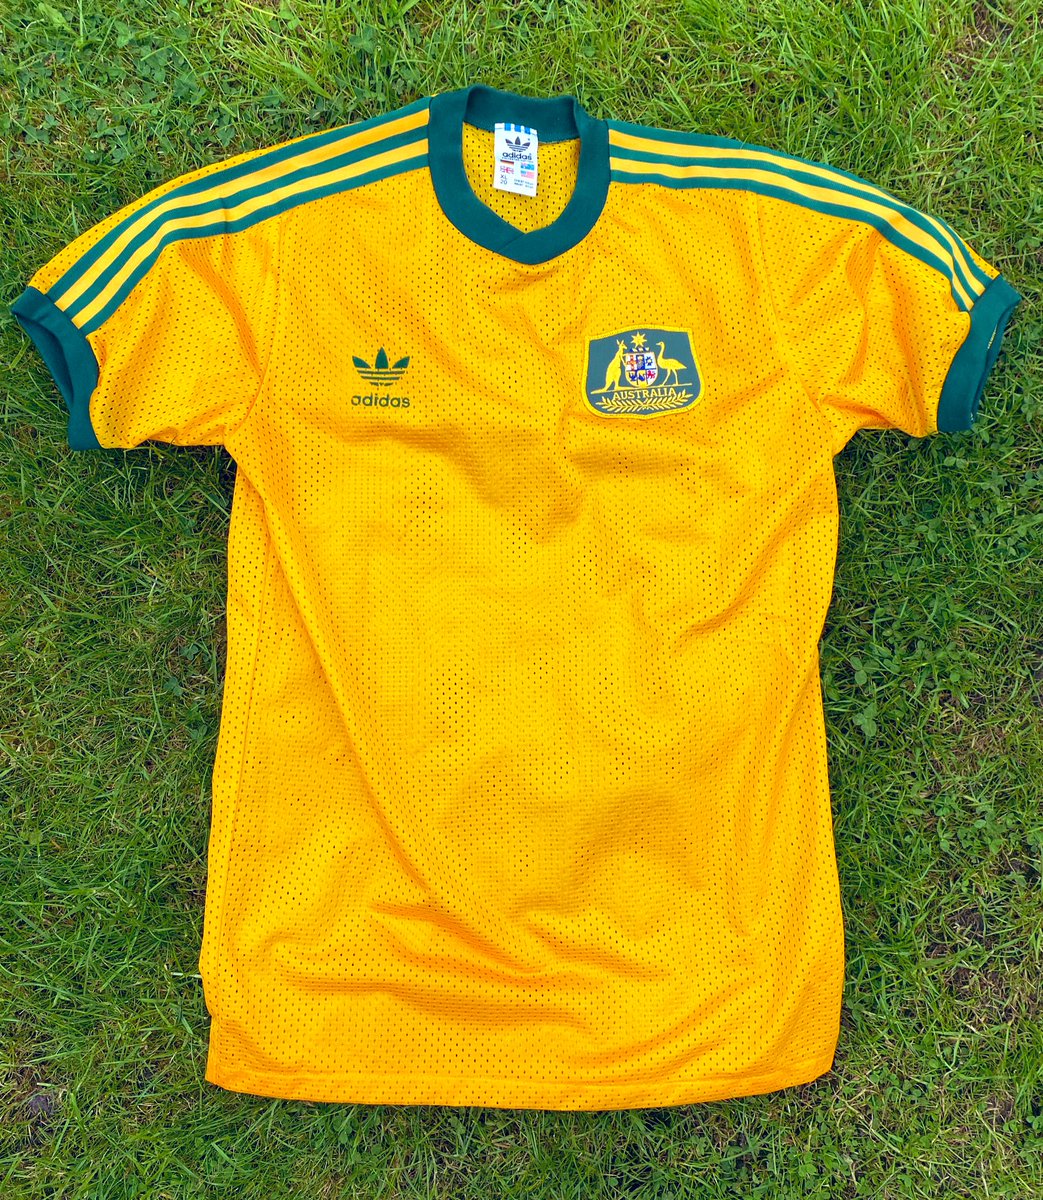 Australia 1989 shirt. Fantastic bit of trefoil 🦘 🟡🟢

Worn for the Italia ‘90 qualifiers, where the Socceroos lost out to the Israelis by a point in their bid to make the continental playoff round.